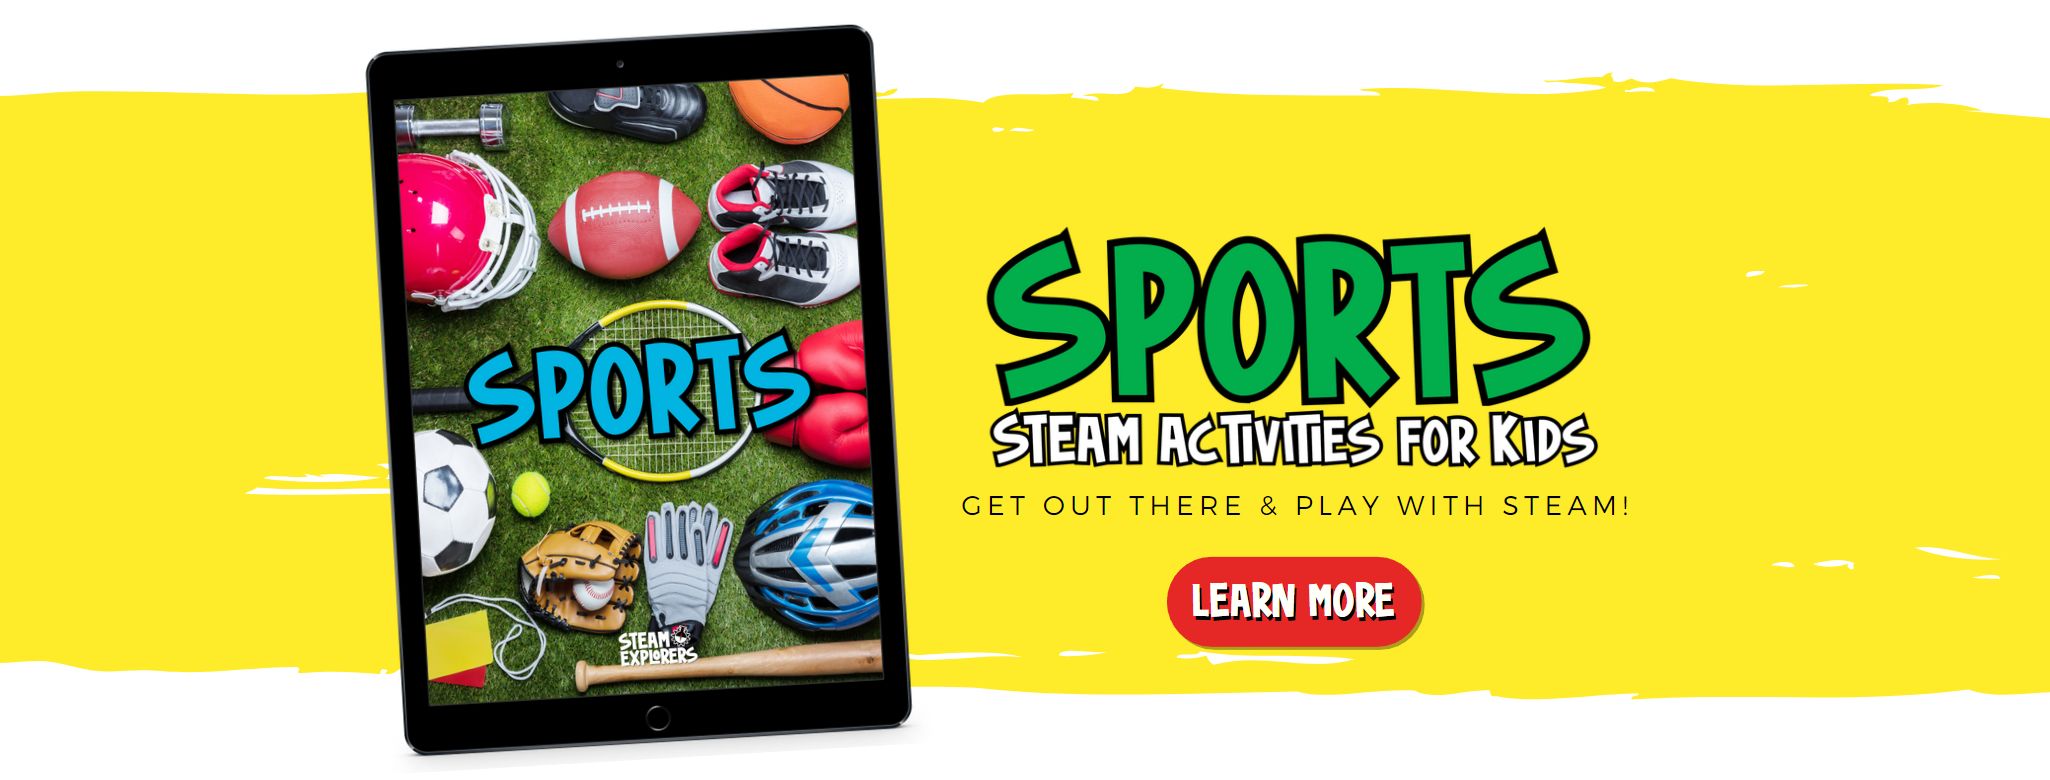 Sports STEAM Activities for Kids - Get out there and play with STEAM! with STEAM Explorers Sports ipad on yellow background